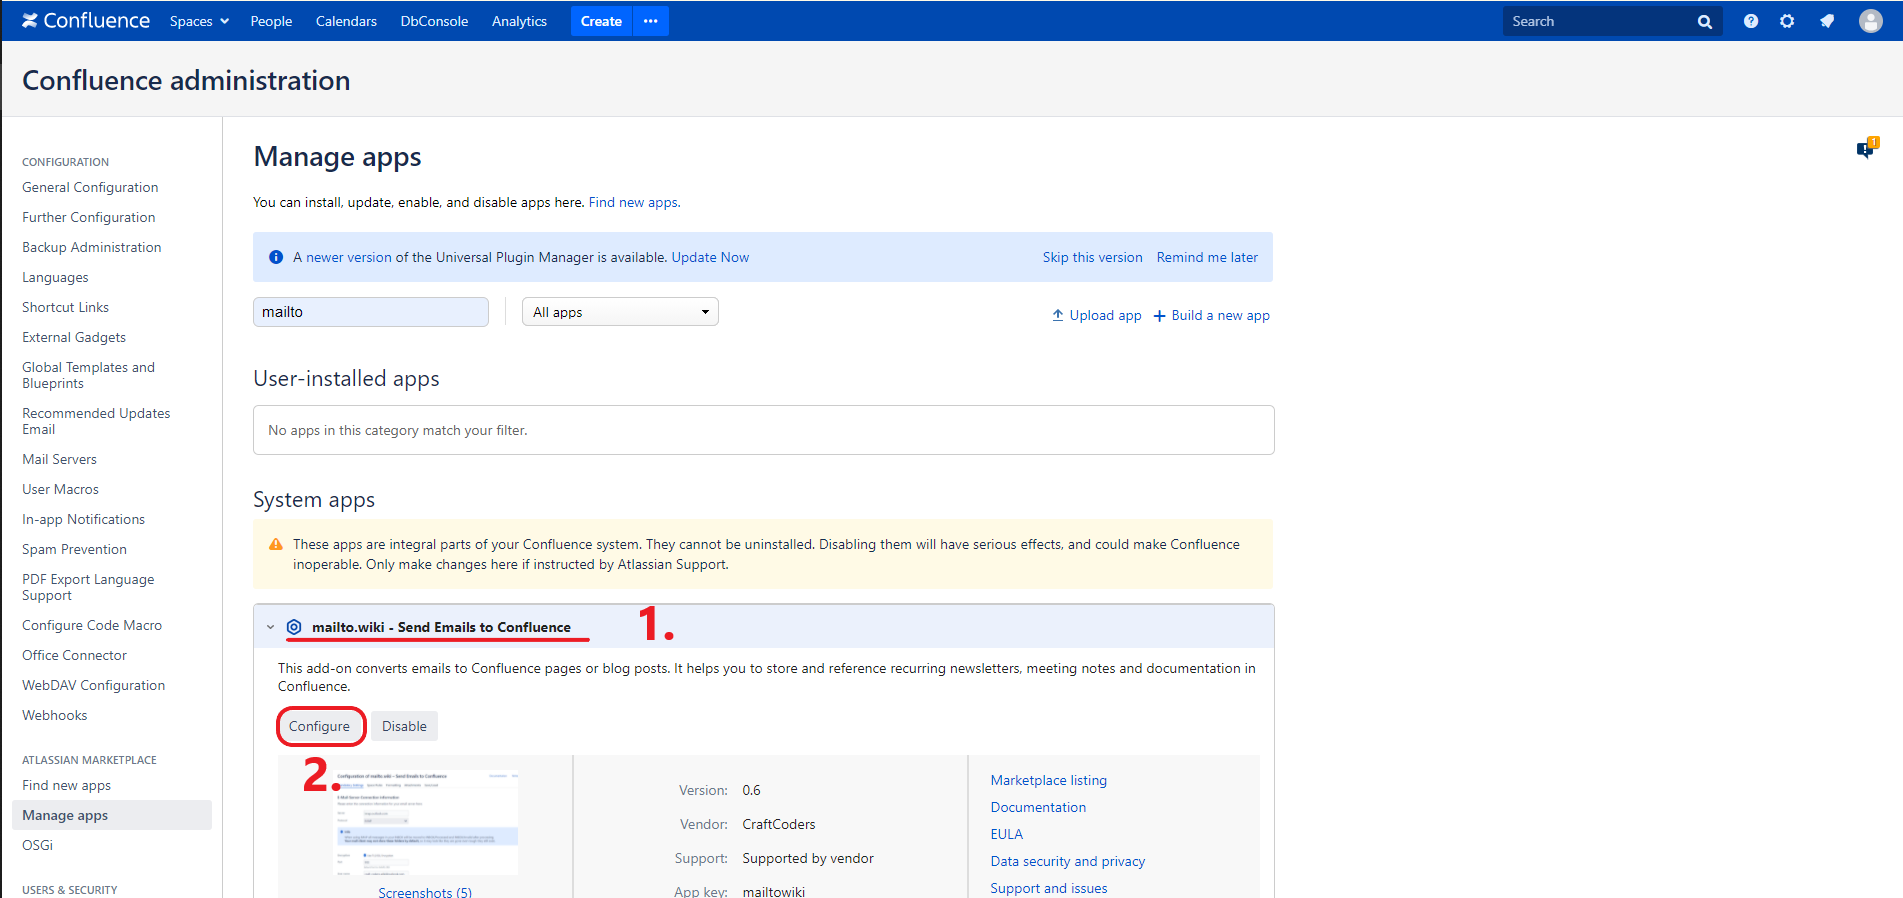 Shows how to get to the configuration page of mailto.wiki.